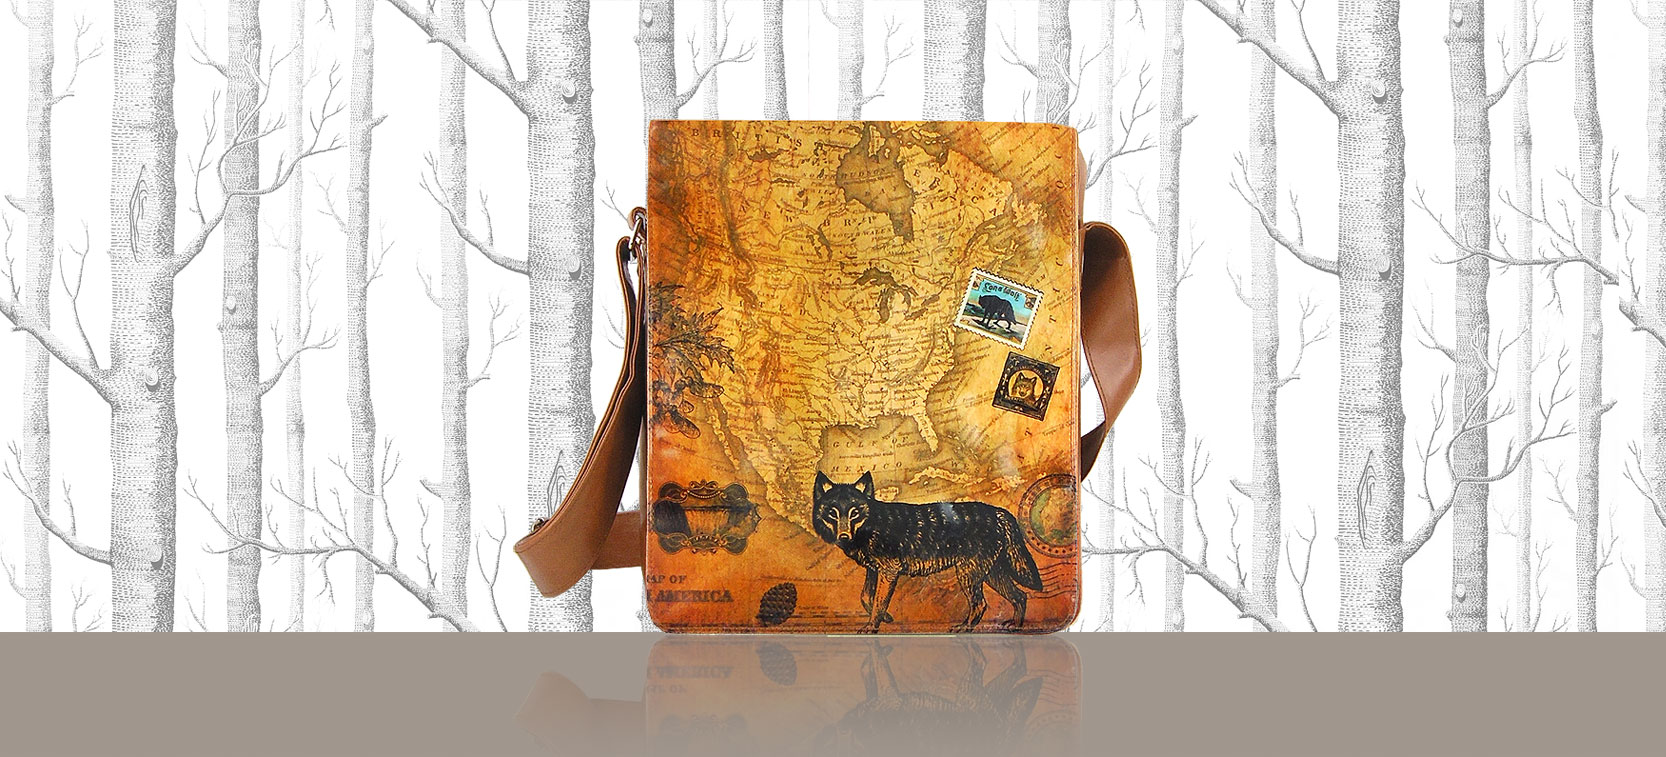 LAVISHY design and wholesale wolf themed vegan accessories and gfits to gift shops, boutiques and book shops, souvenir stores in Canada, USA and worldwide.